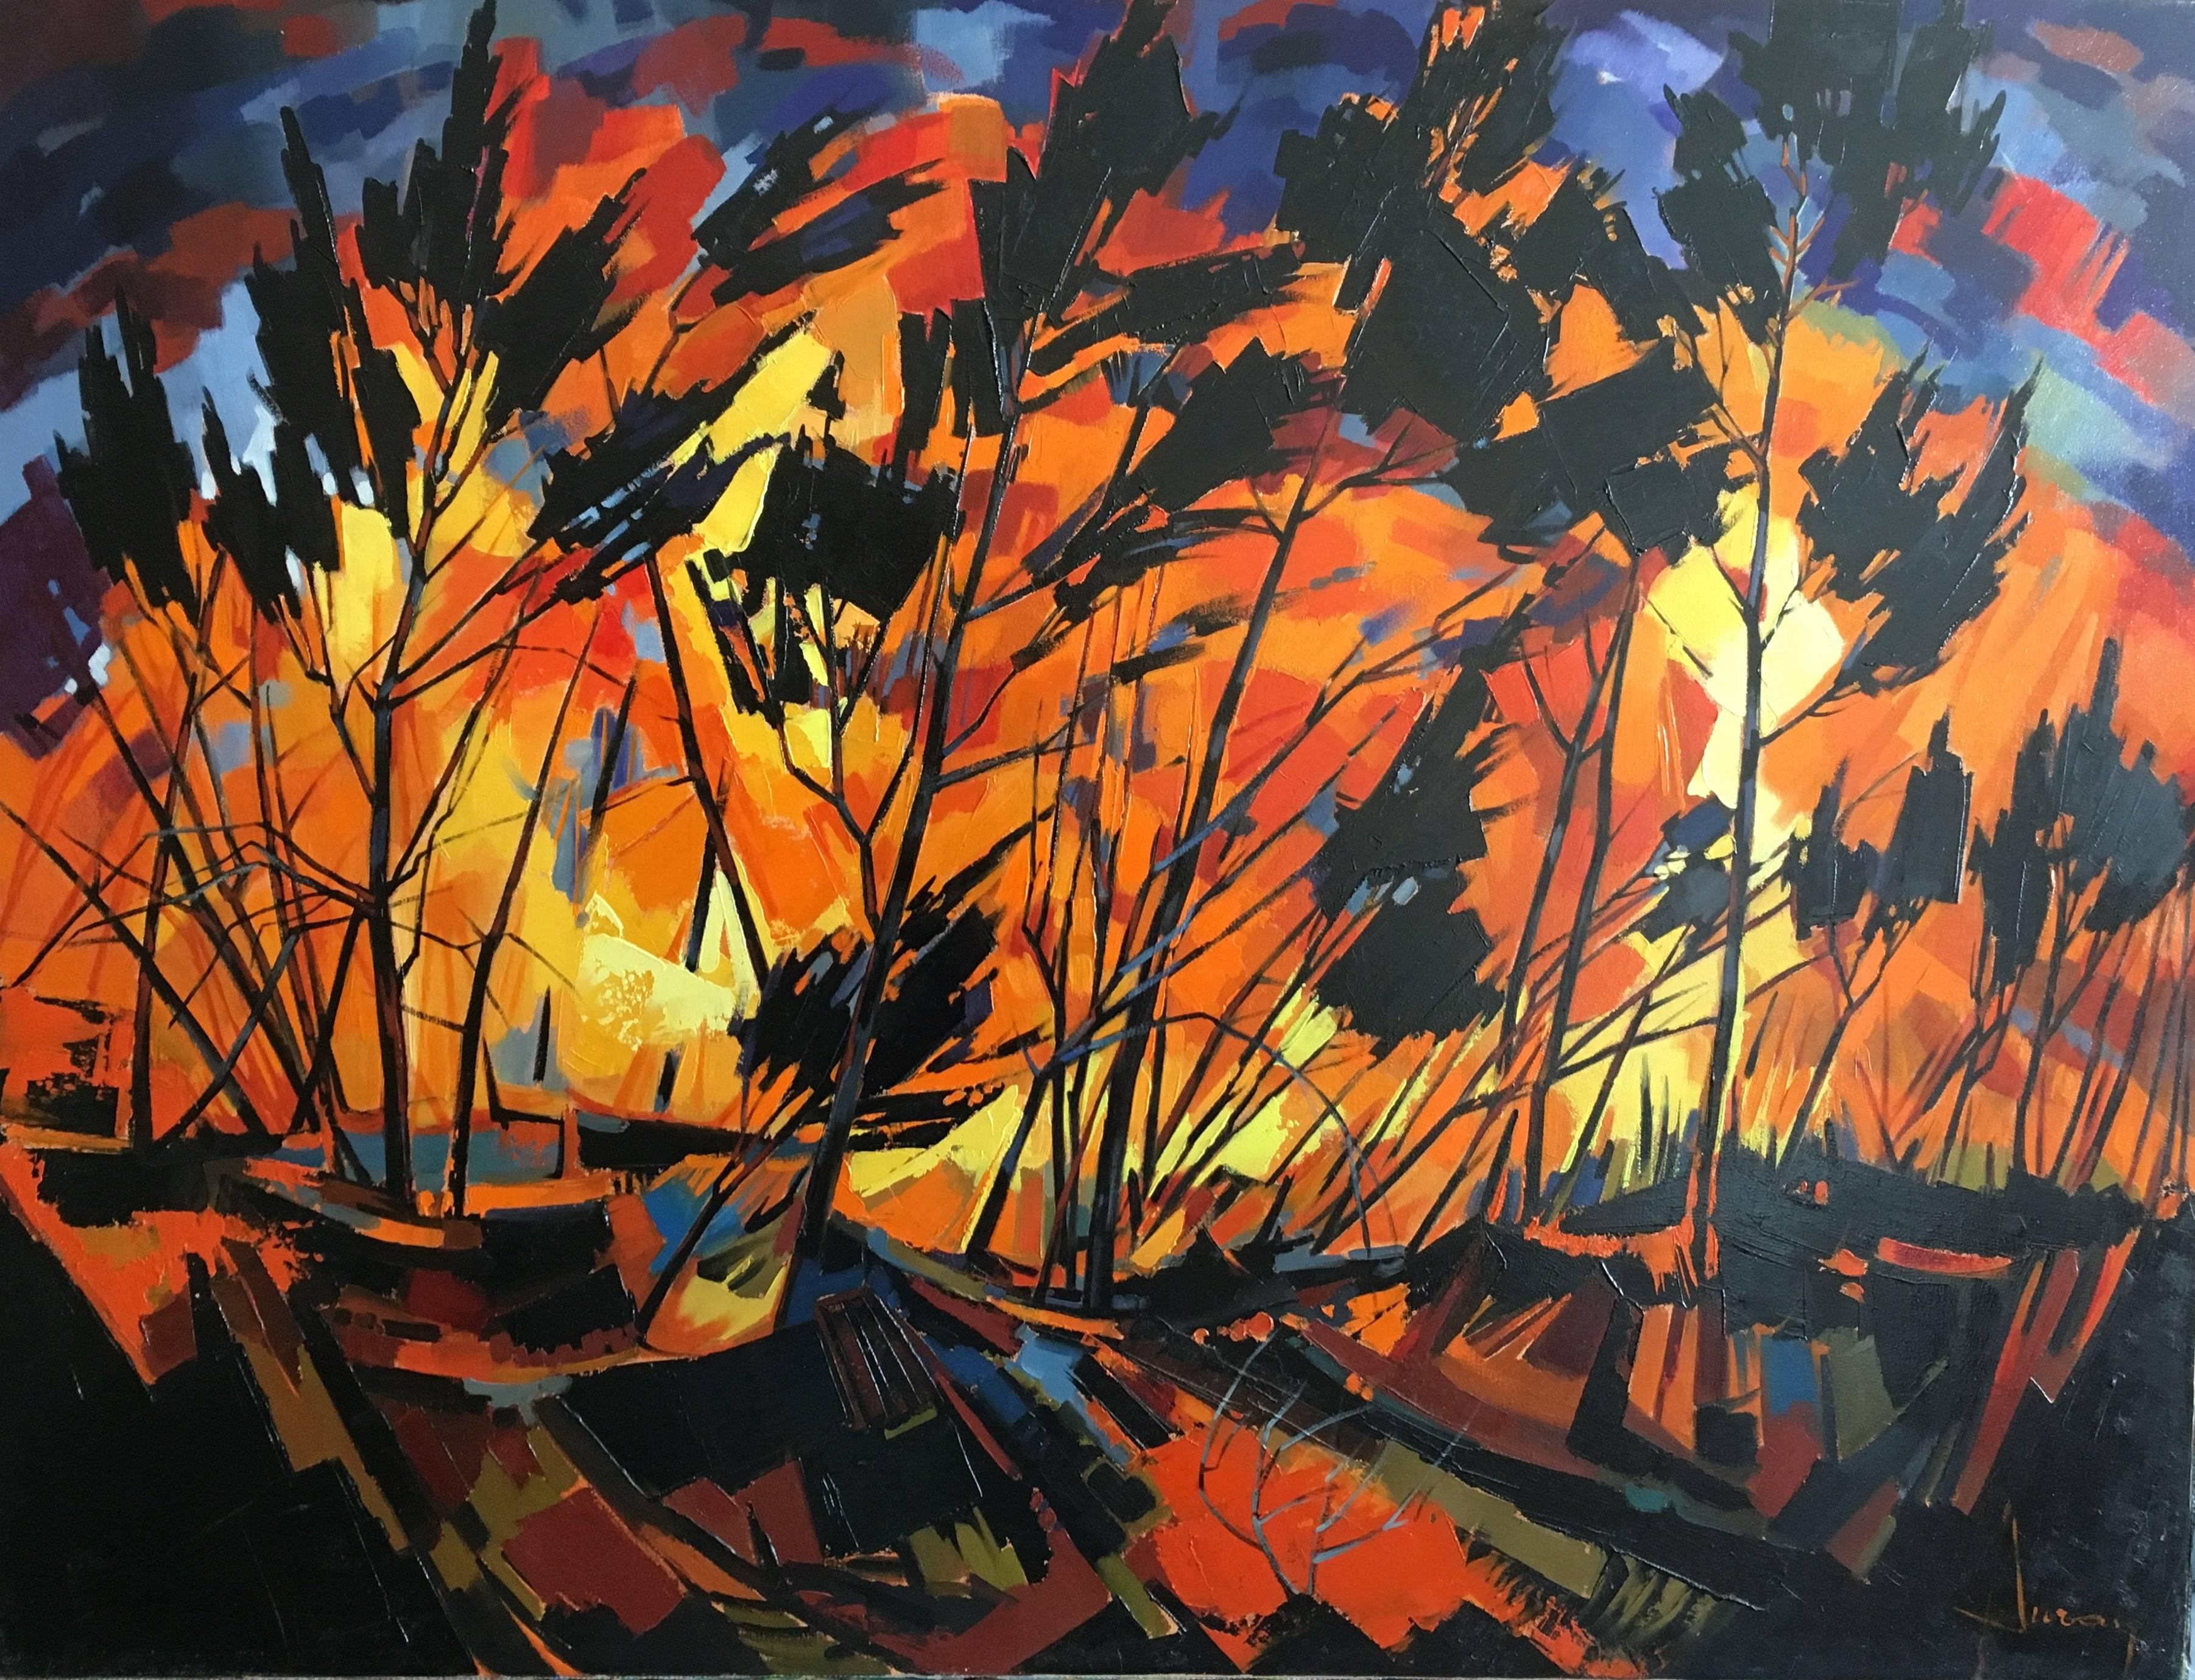 Jori Duran Figurative Painting - Fire in The Landes forest, expressionist landscape